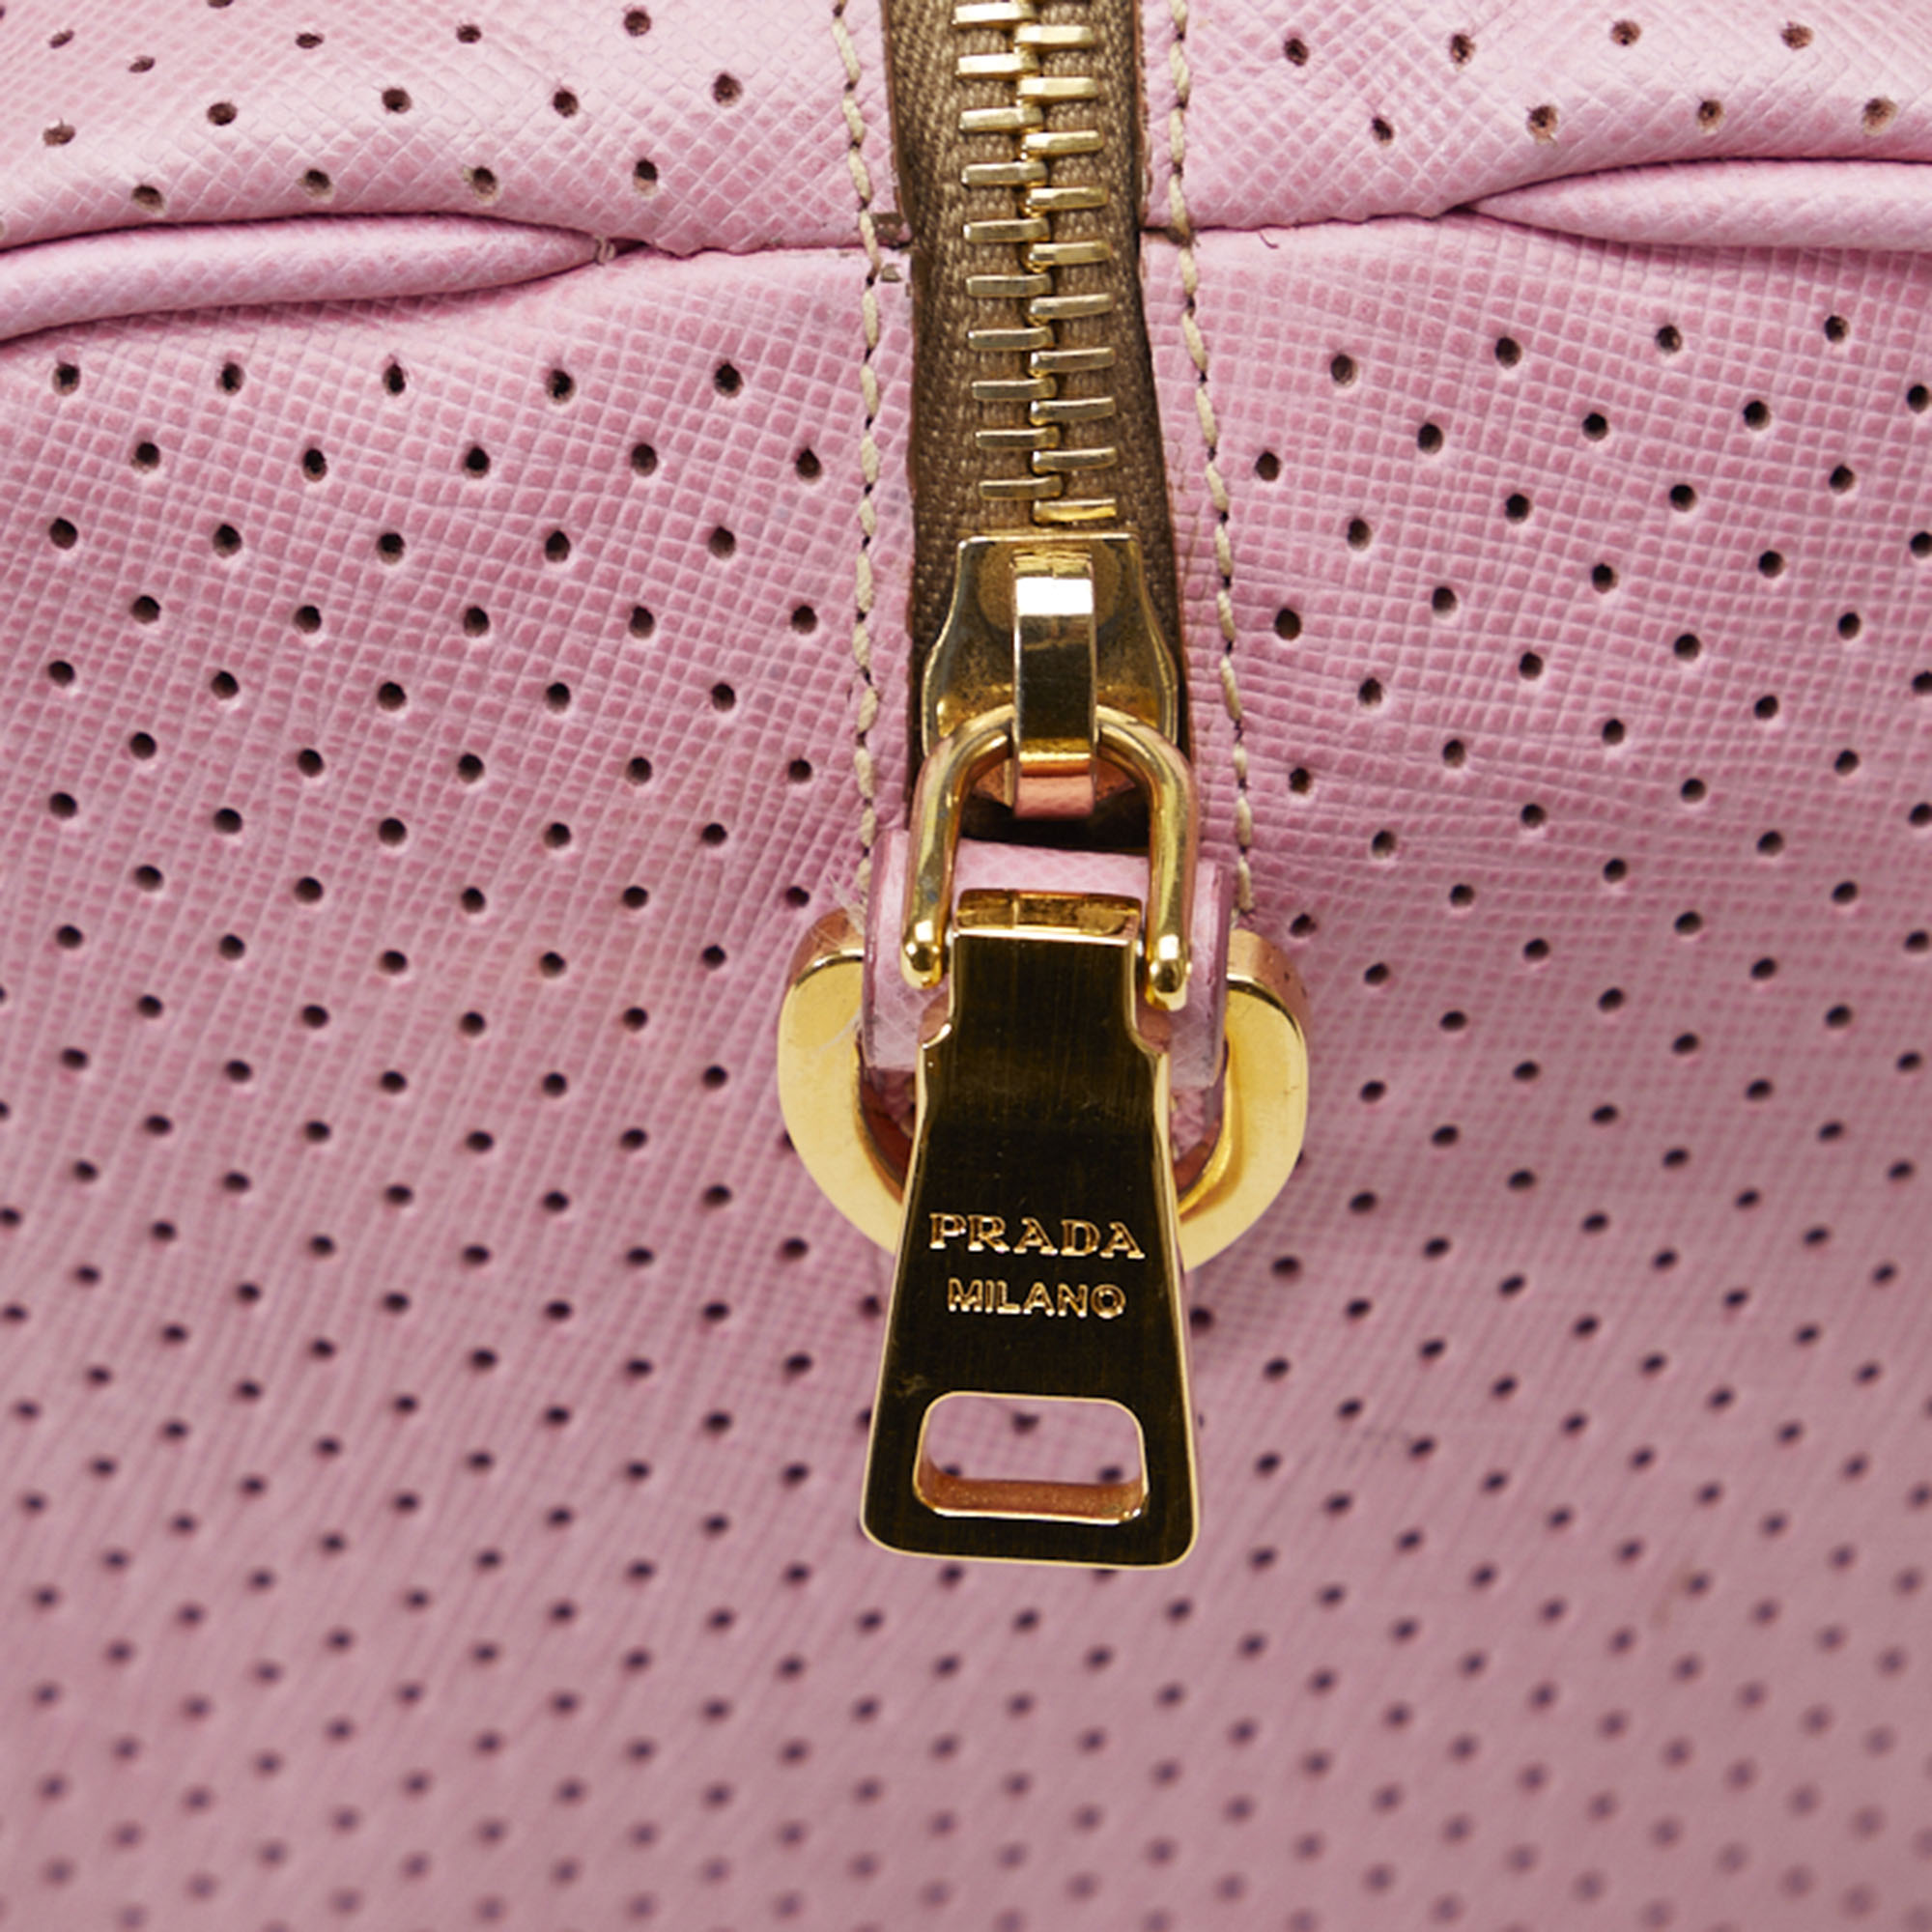 Prada Pink/Yellow Perforated Leather Lux Bauletto Boston Bag